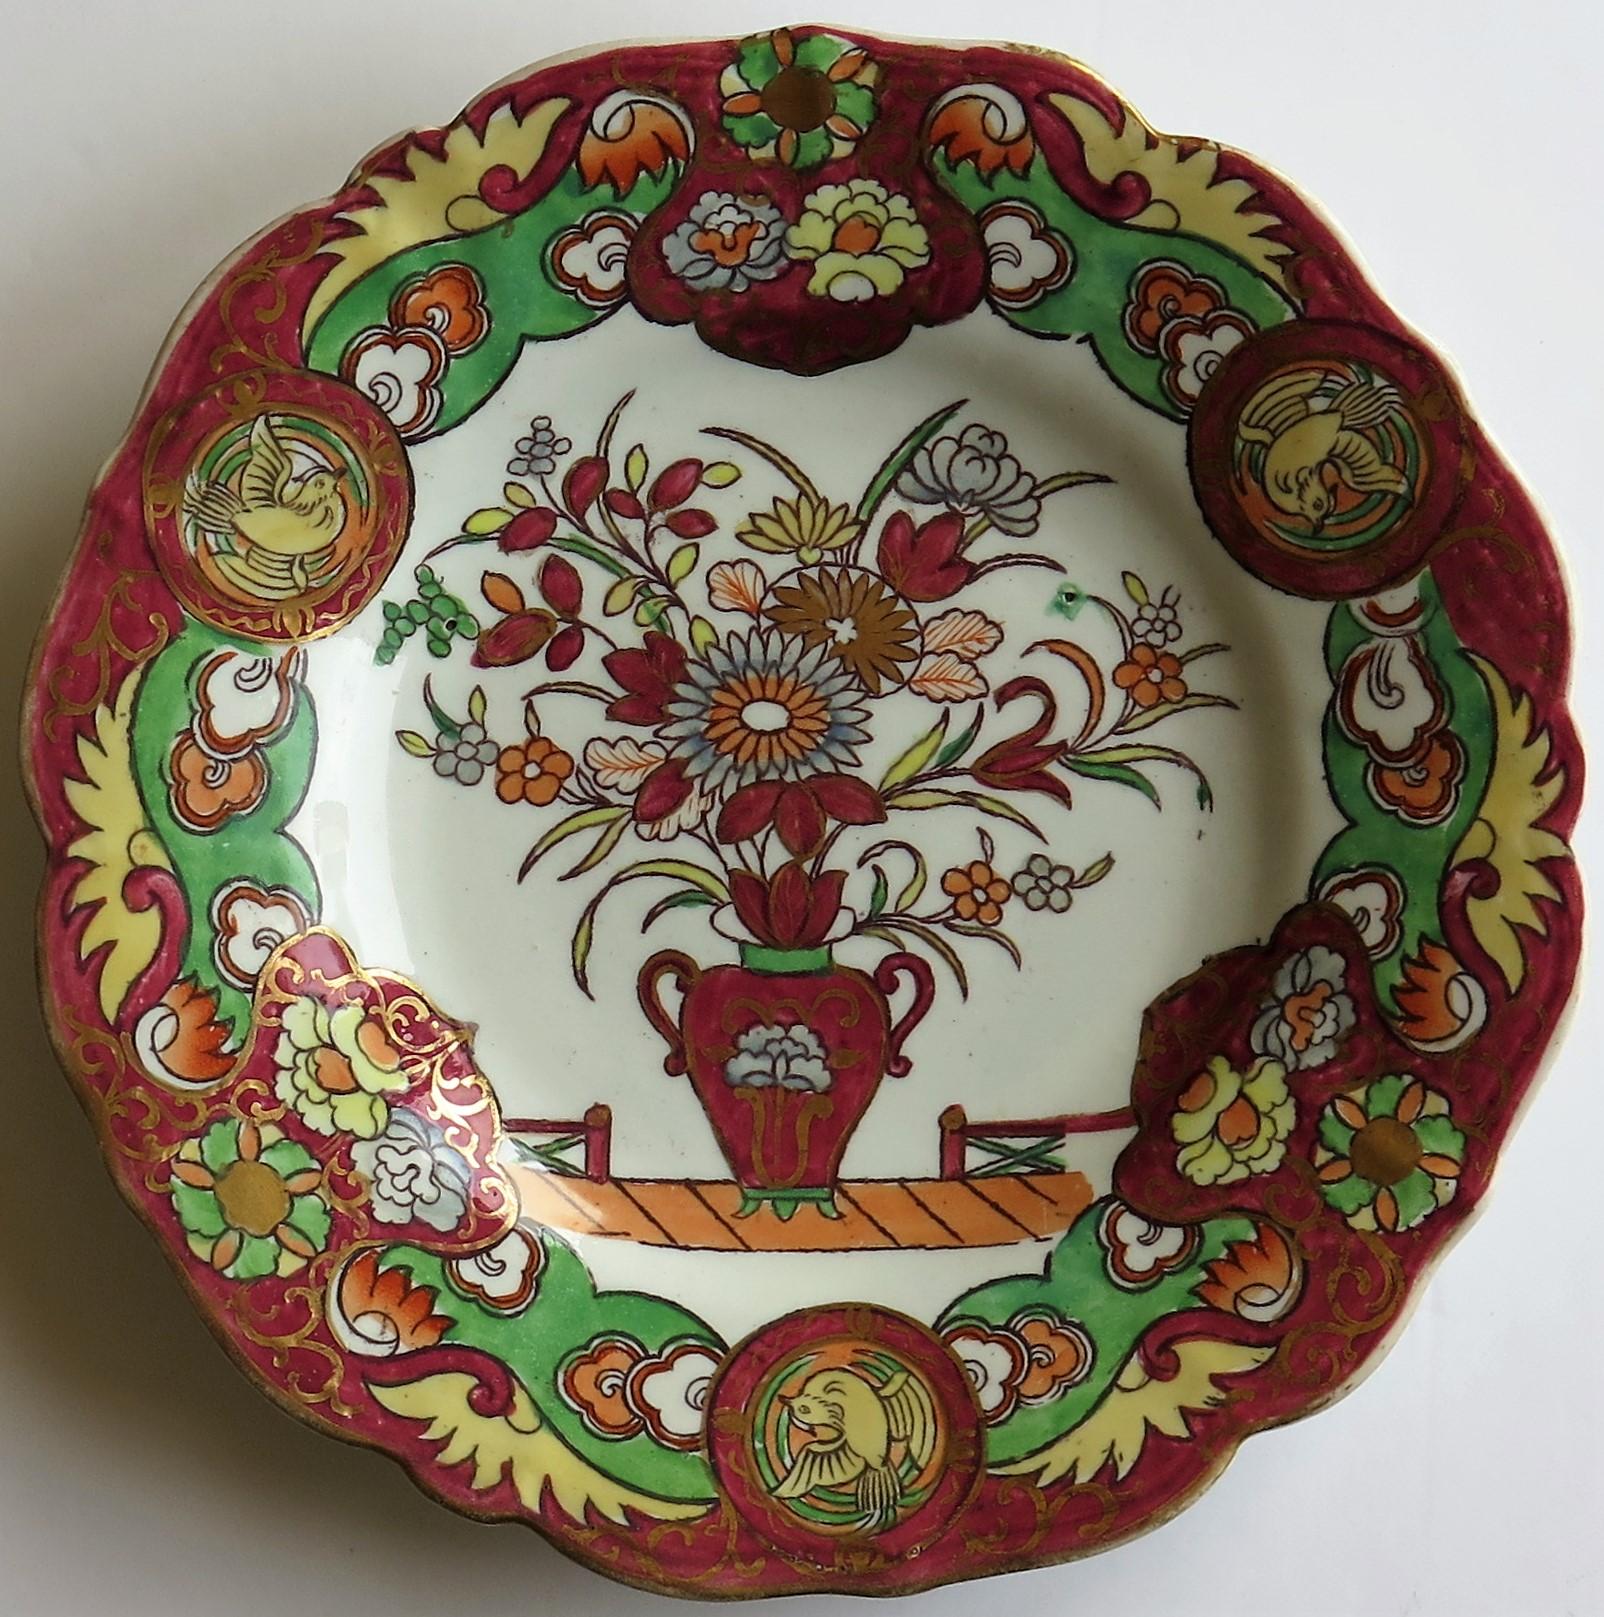 Georgian Mason's Ironstone Desert Dish or Plate in Fence Vase and Doves Pattern, Ca 1830